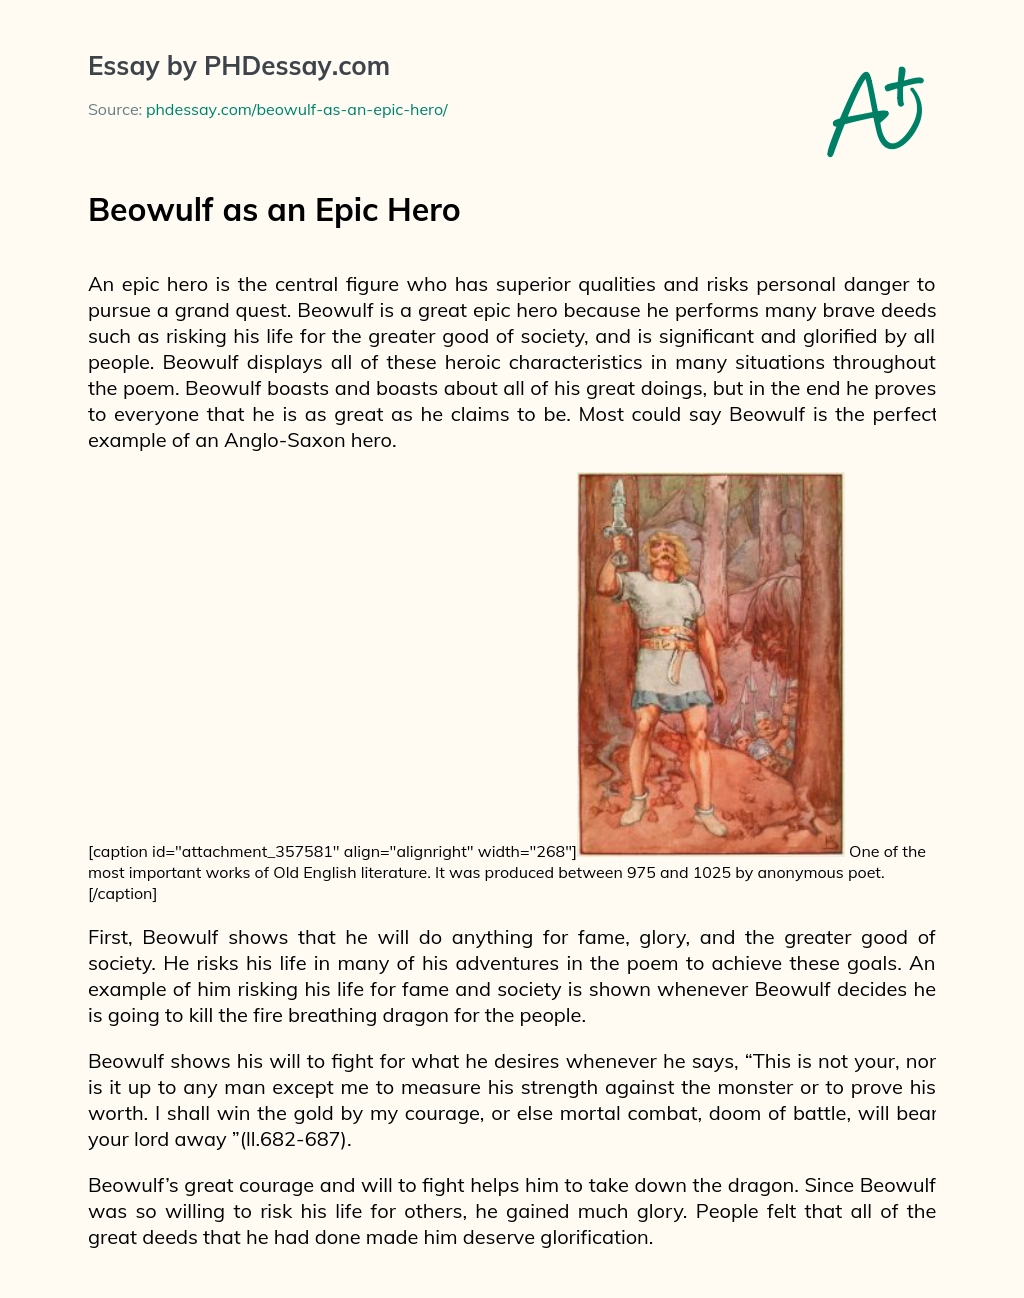 Beowulf as an Epic Hero essay